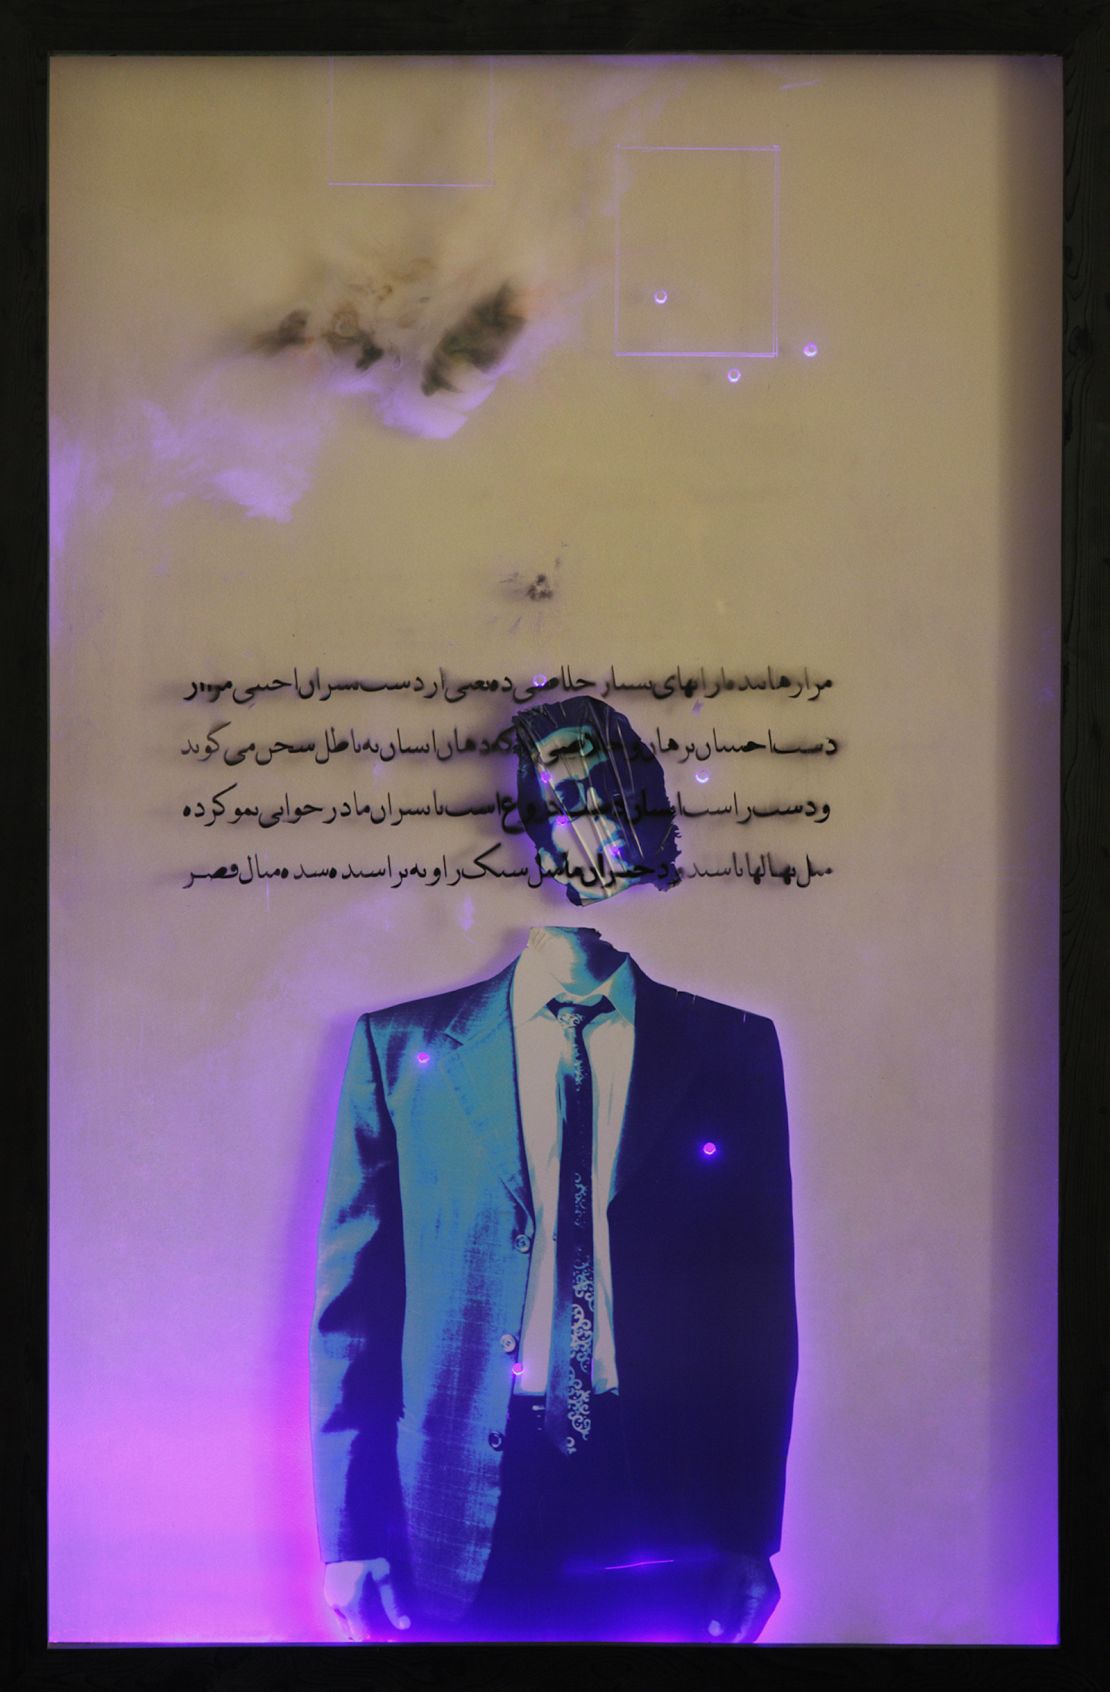 "Rascal 2," by Majid Abbasi Farahani, who said that the US travel ban prevented him from visiting New York to represent other Iranian artists.